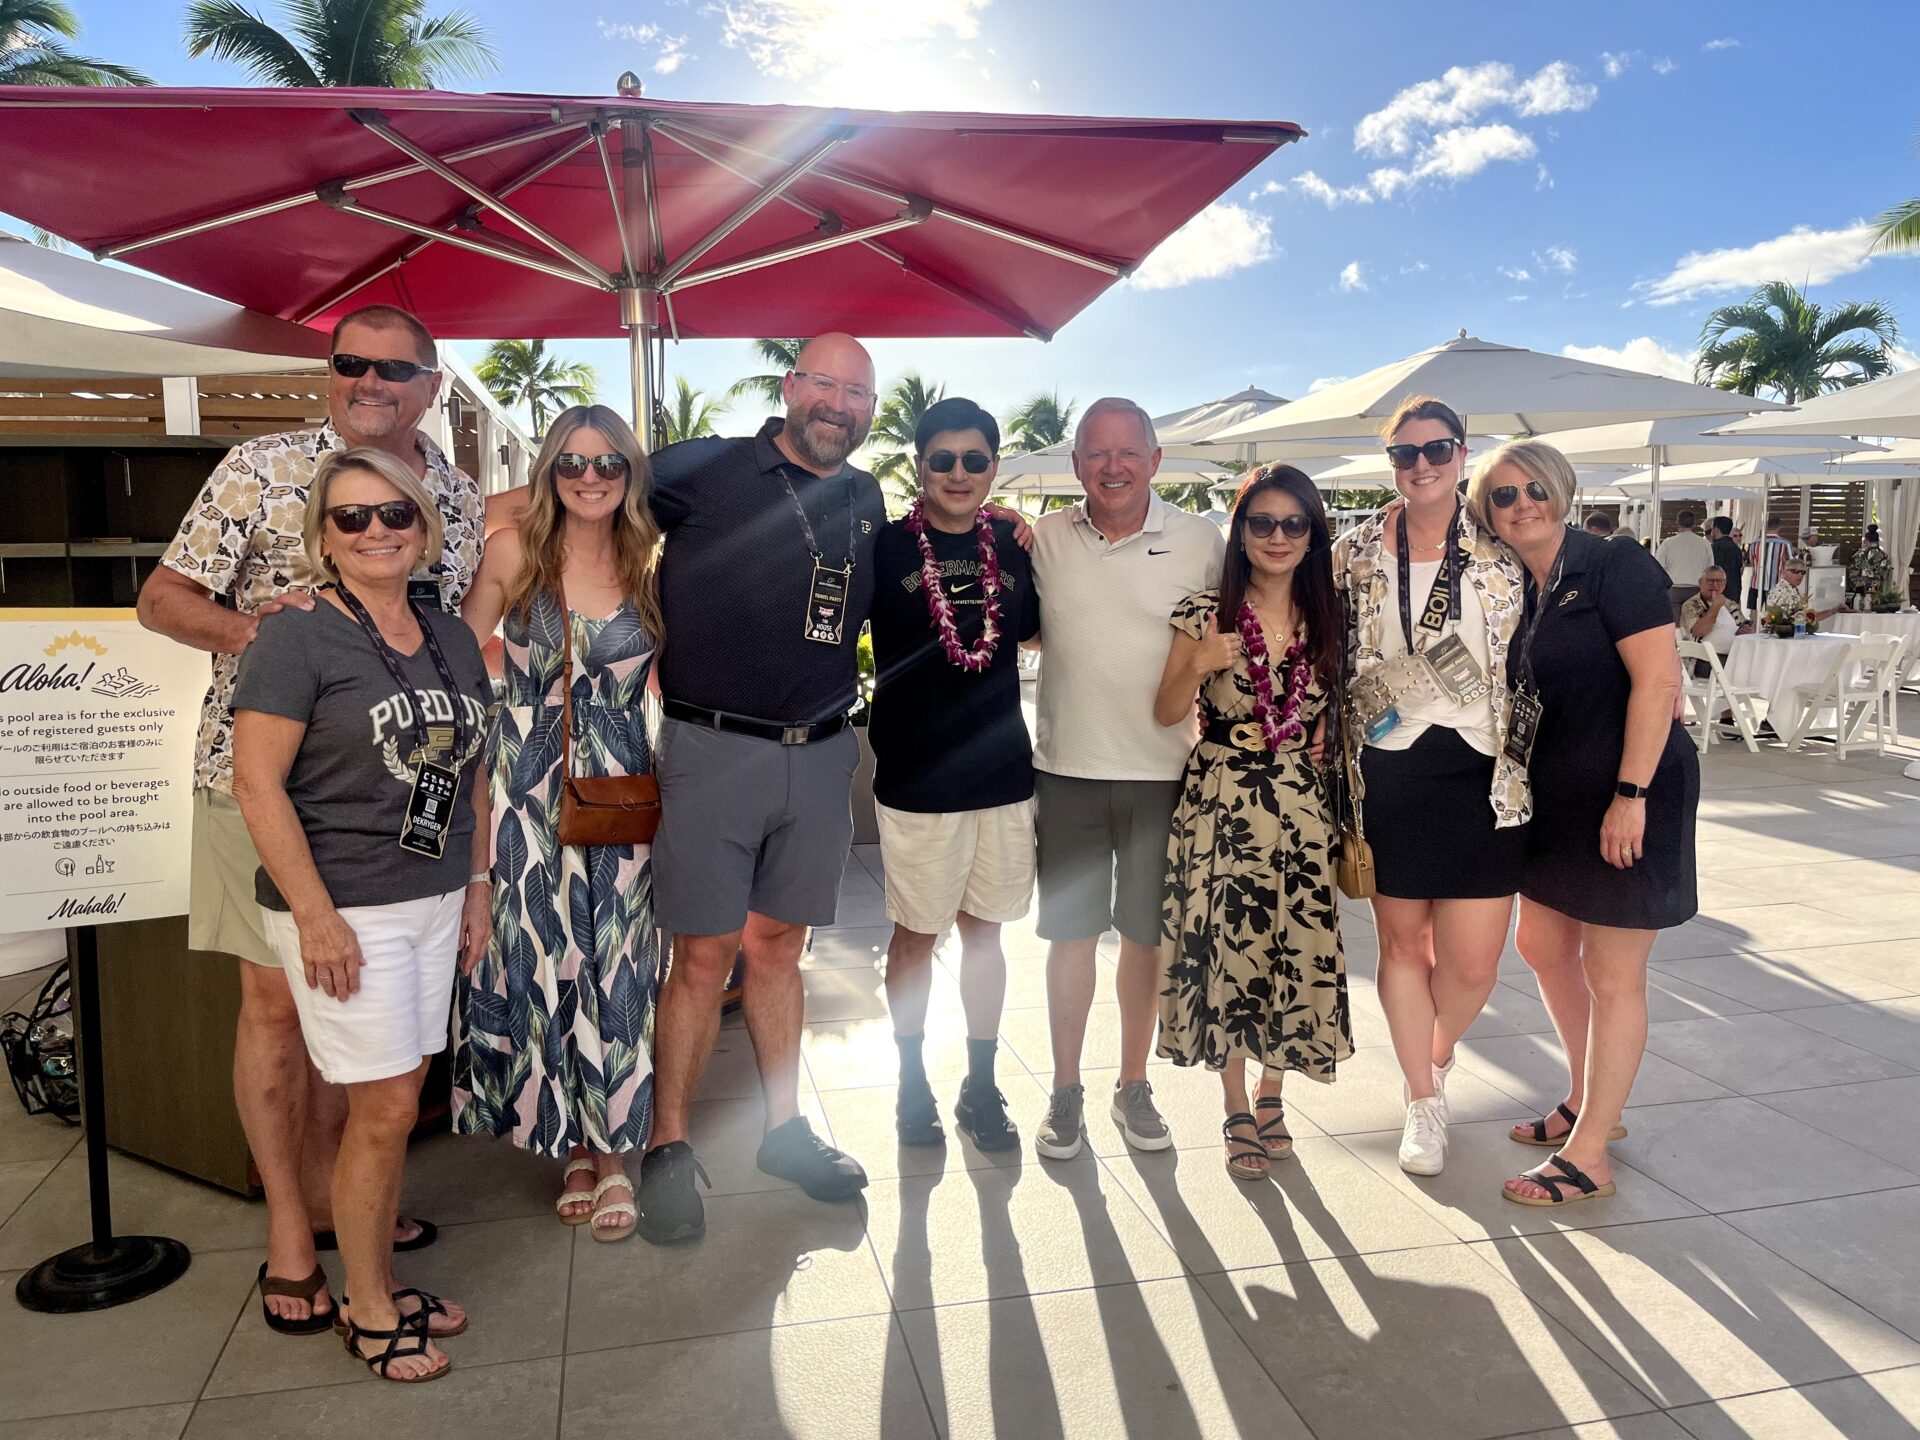 Going Above and Beyond- the Dedicated and Passionate Staff of the John Purdue Club. A Team That Makes It Happen: this staff worked tirelessly behind the scenes to ensure all details were taken care of in Hawaii! Boilermaker Spirit at its best!